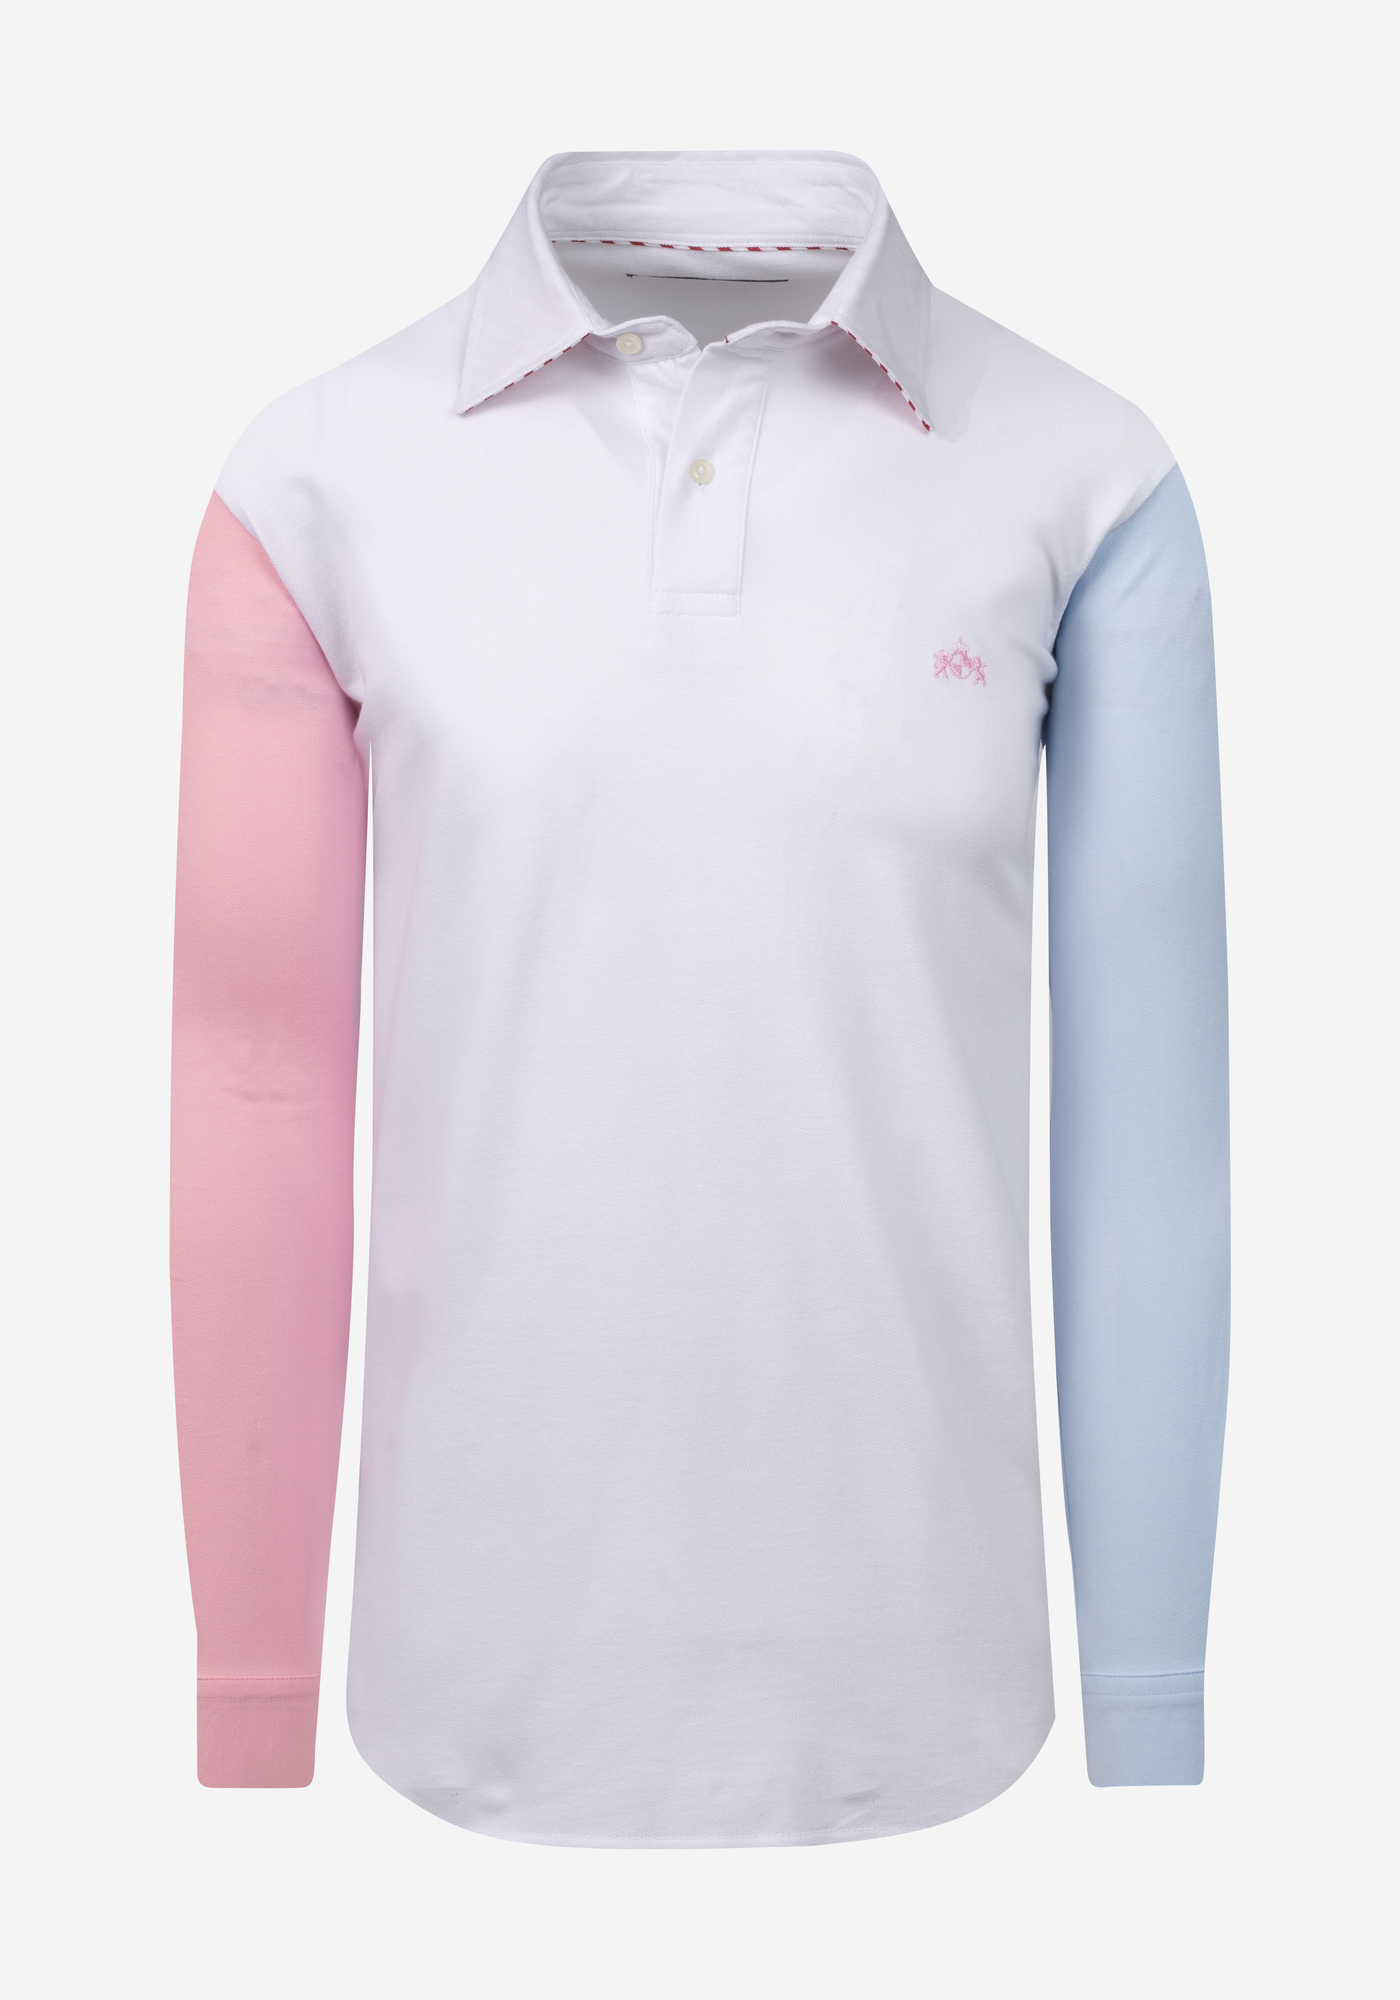 Pearl White Cotton Parti-Colored Polo Shirt - Long Sleeve